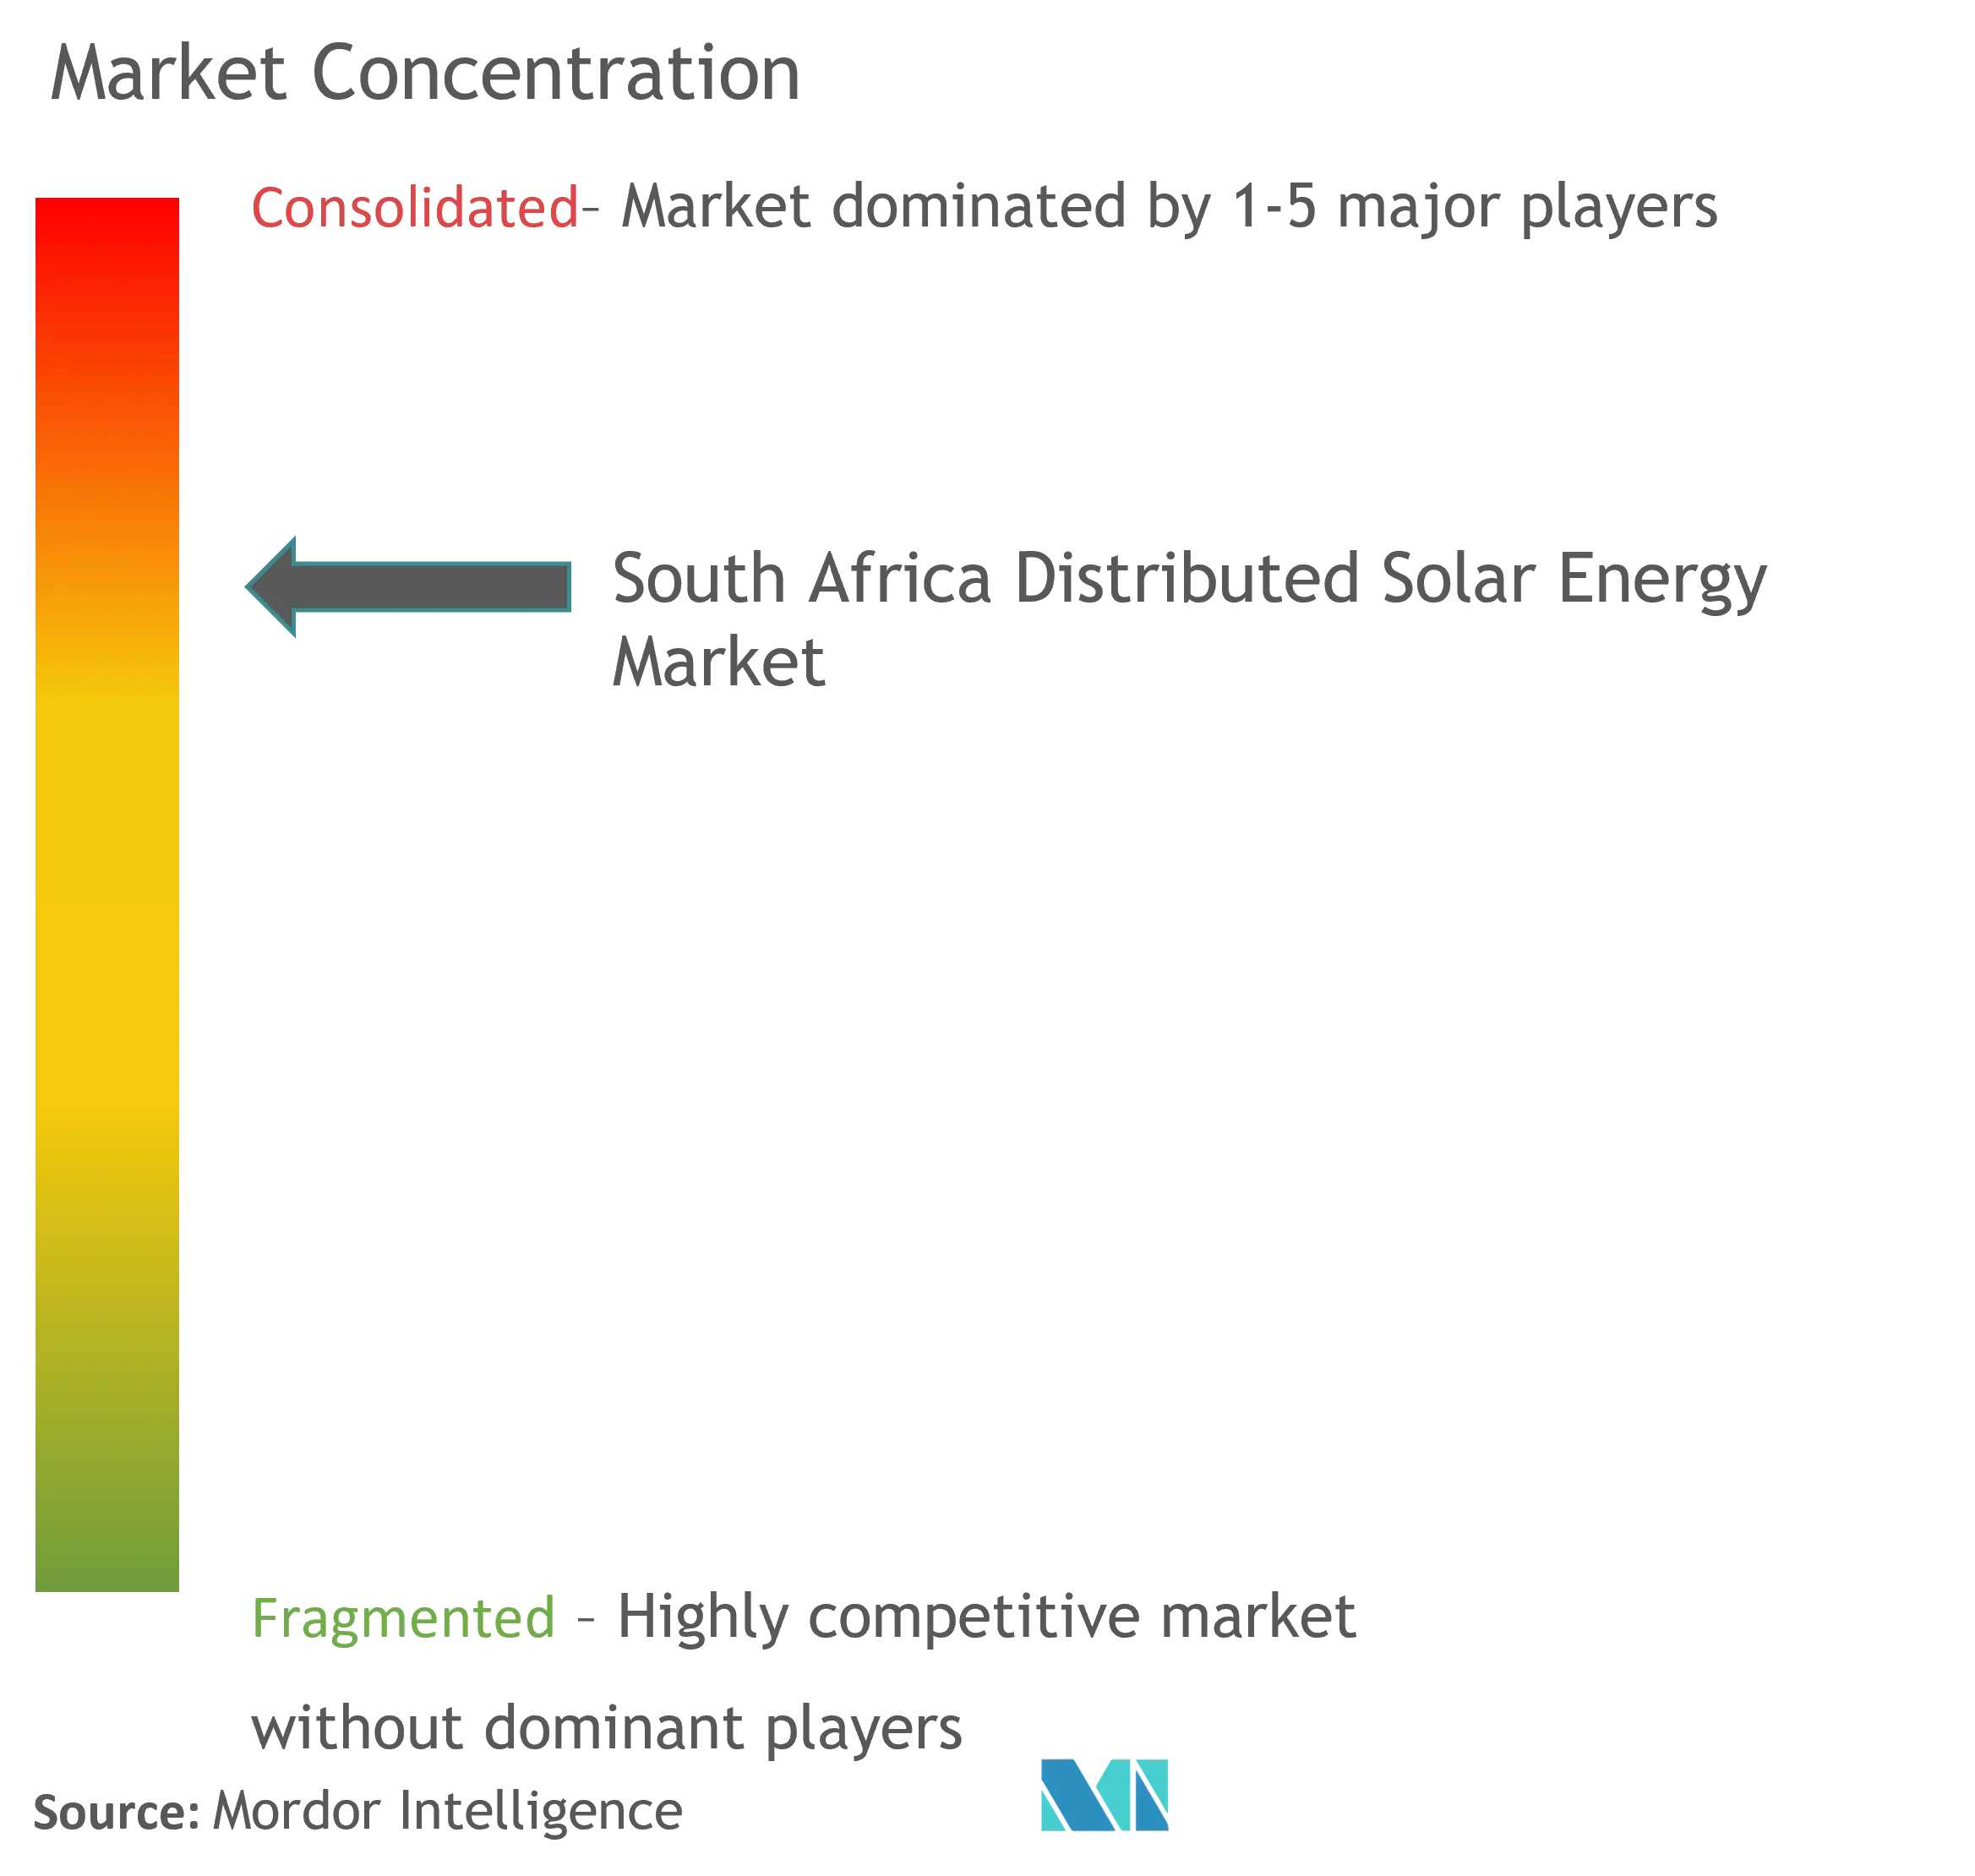 South Africa Distributed Solar Energy Market Concentration